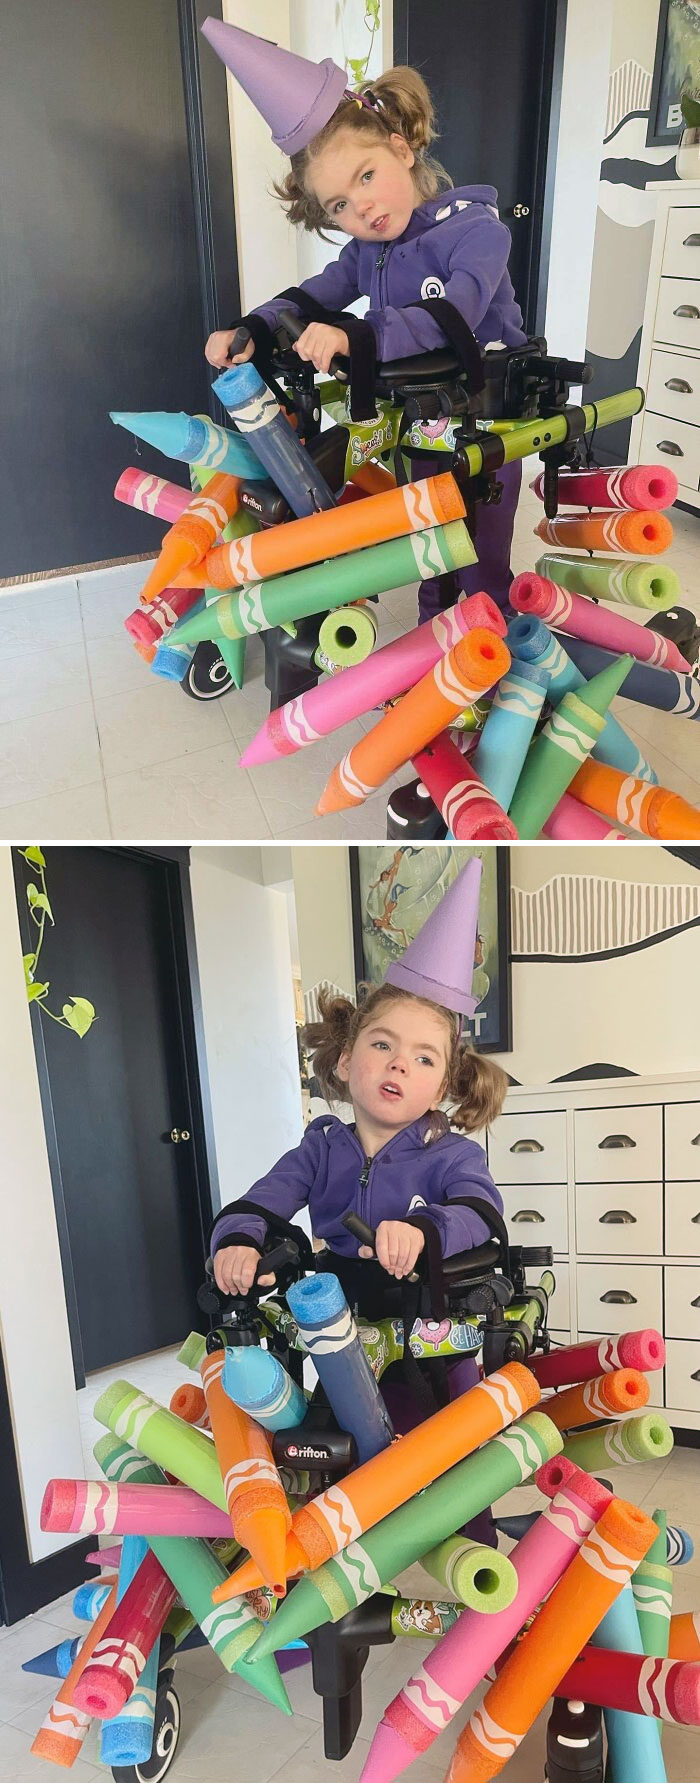 My 5-Year-Old Going As A “Pile Of Crayons” For Halloween. They’re Made From Pool Noodles, Hockey Tape And Construction Paper And Tied Together So They Can Be Hung On Her Walker